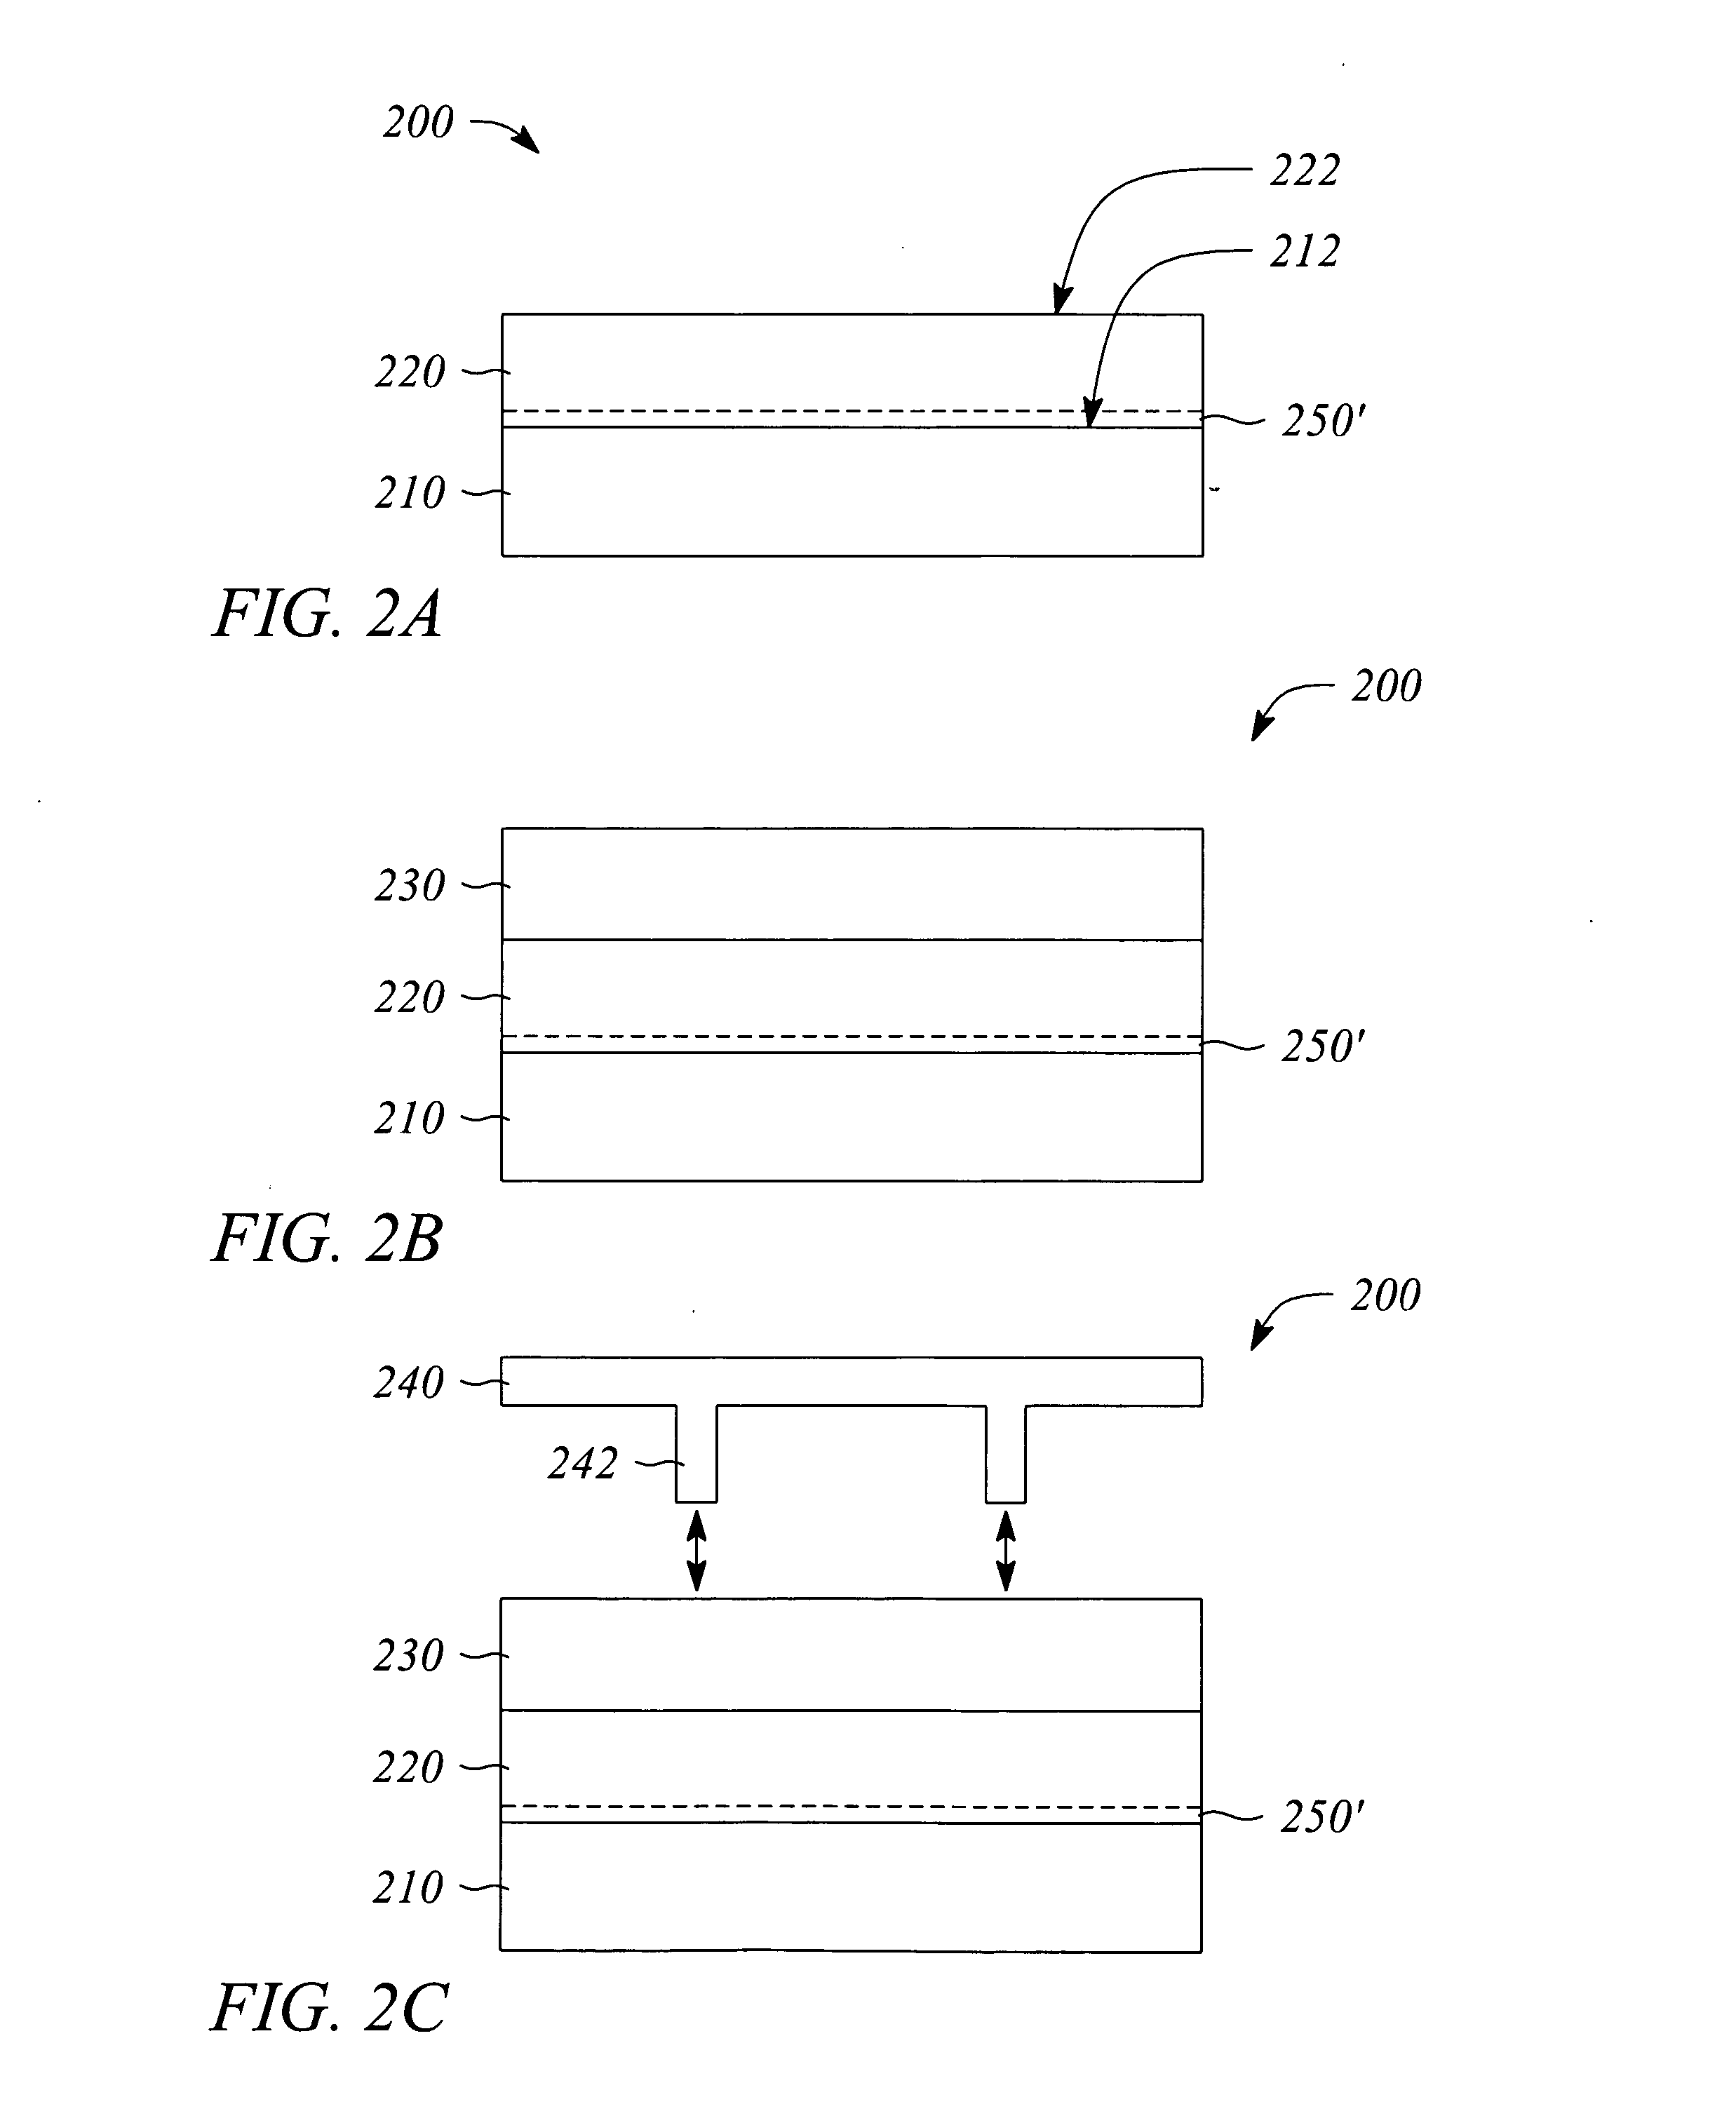 Method of controlling nanowire growth and device with controlled-growth nanowire